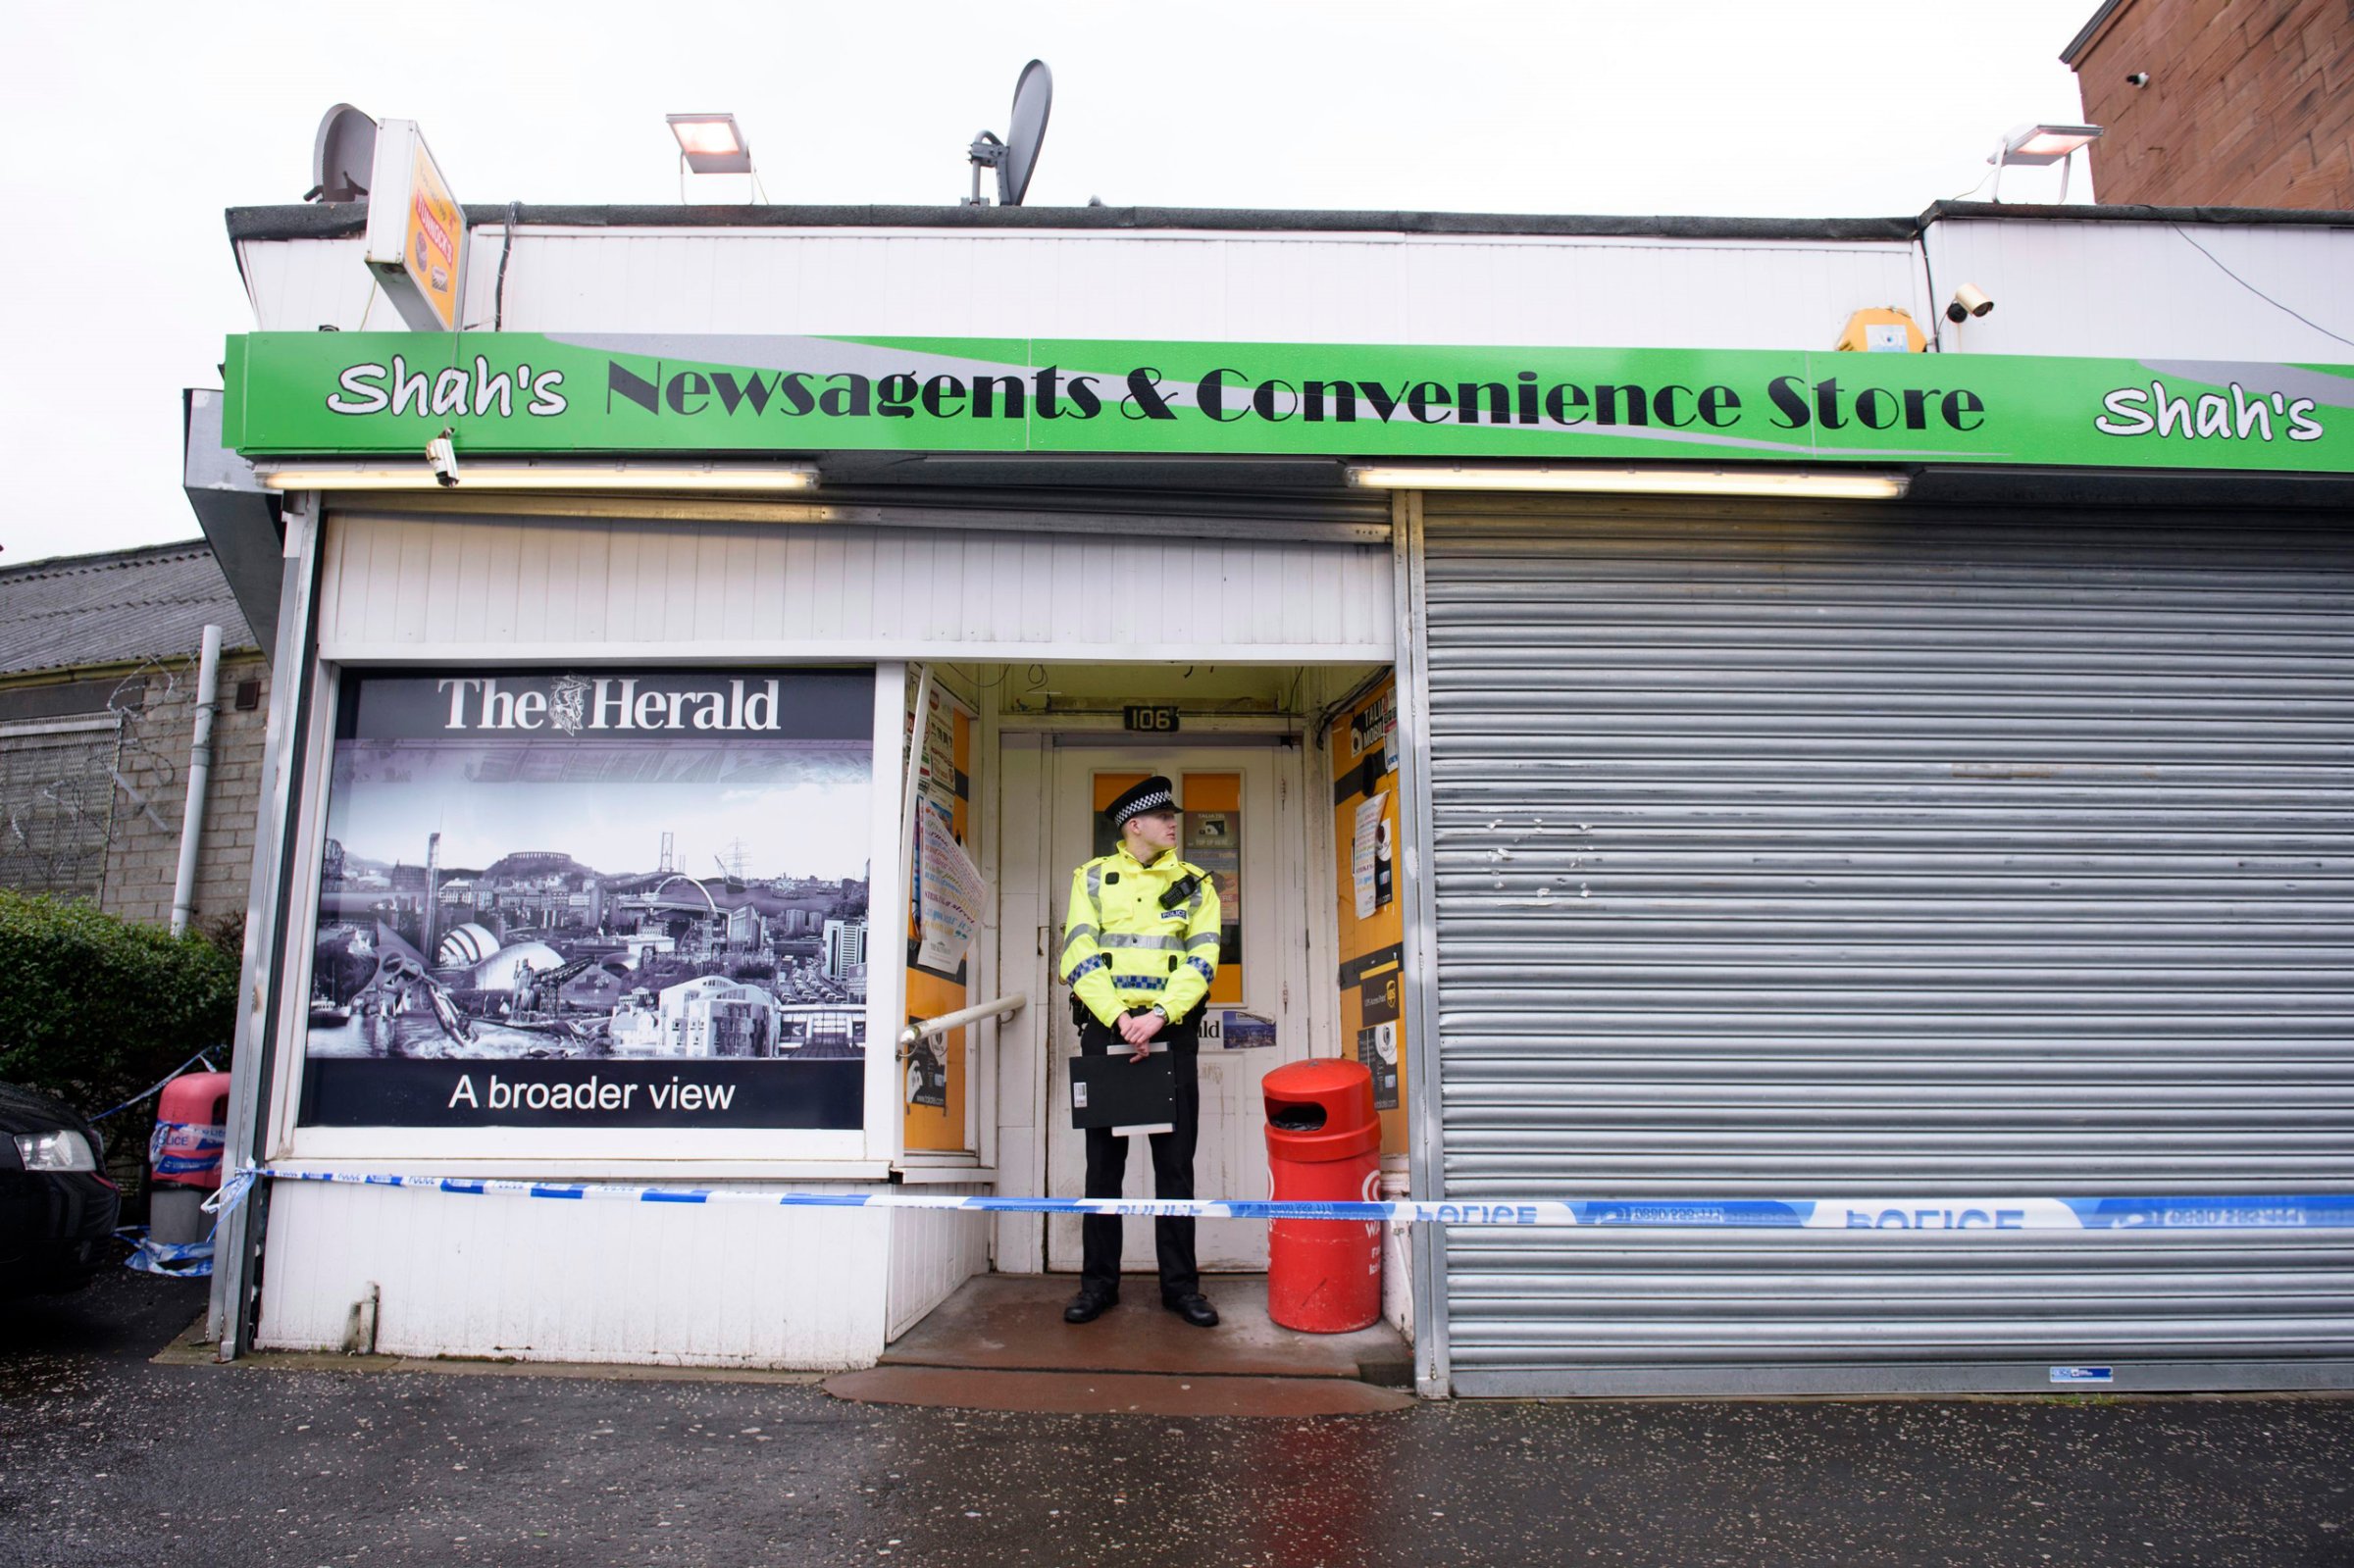 A police officer stands outside the shop where Asad Shah worked in Glasgow, Saturday March 26, 2016. Scottish police say the killing of a Muslim shopkeeper who wished Christians a happy Easter is being investigated as “religiously prejudiced.” Vigils were held Friday and Saturday in memory of 40-year-old Asad Shah, who was killed Thursday night in Glasgow. (John Linton/PA via AP) UNITED KINGDOM OUT NO SALES NO ARCHIVE